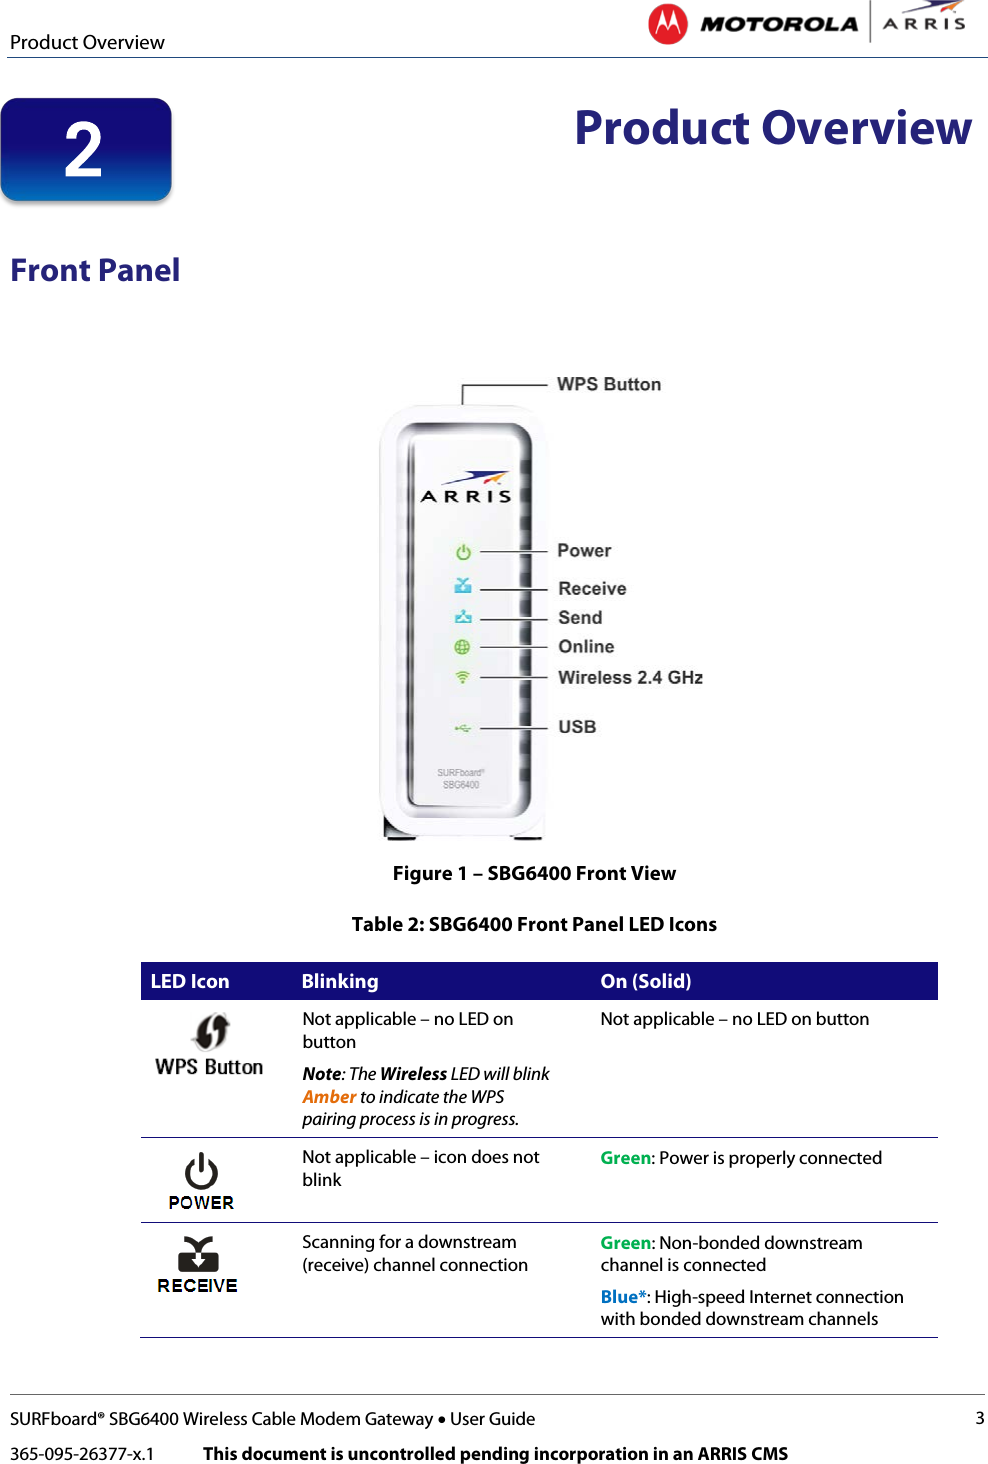 Product Overview   SURFboard® SBG6400 Wireless Cable Modem Gateway • User Guide 3 365-095-26377-x.1            This document is uncontrolled pending incorporation in an ARRIS CMS   Product Overview Front Panel   Figure 1 – SBG6400 Front View Table 2: SBG6400 Front Panel LED Icons LED Icon  Blinking On (Solid)  Not applicable – no LED on button Note: The Wireless LED will blink Amber to indicate the WPS pairing process is in progress. Not applicable – no LED on button  Not applicable – icon does not blink Green: Power is properly connected  Scanning for a downstream (receive) channel connection Green: Non-bonded downstream channel is connected  Blue*: High-speed Internet connection with bonded downstream channels 2 